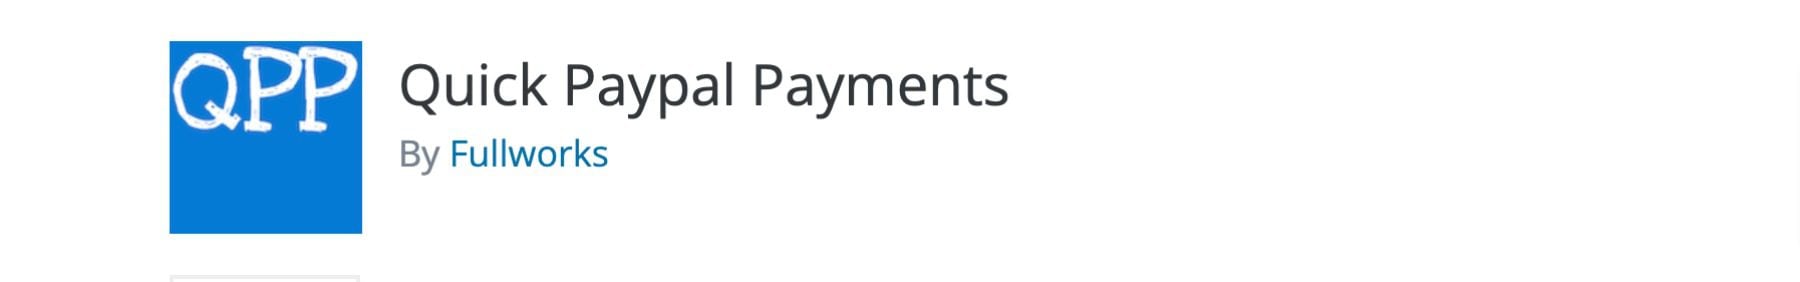 Quick Paypal Payments